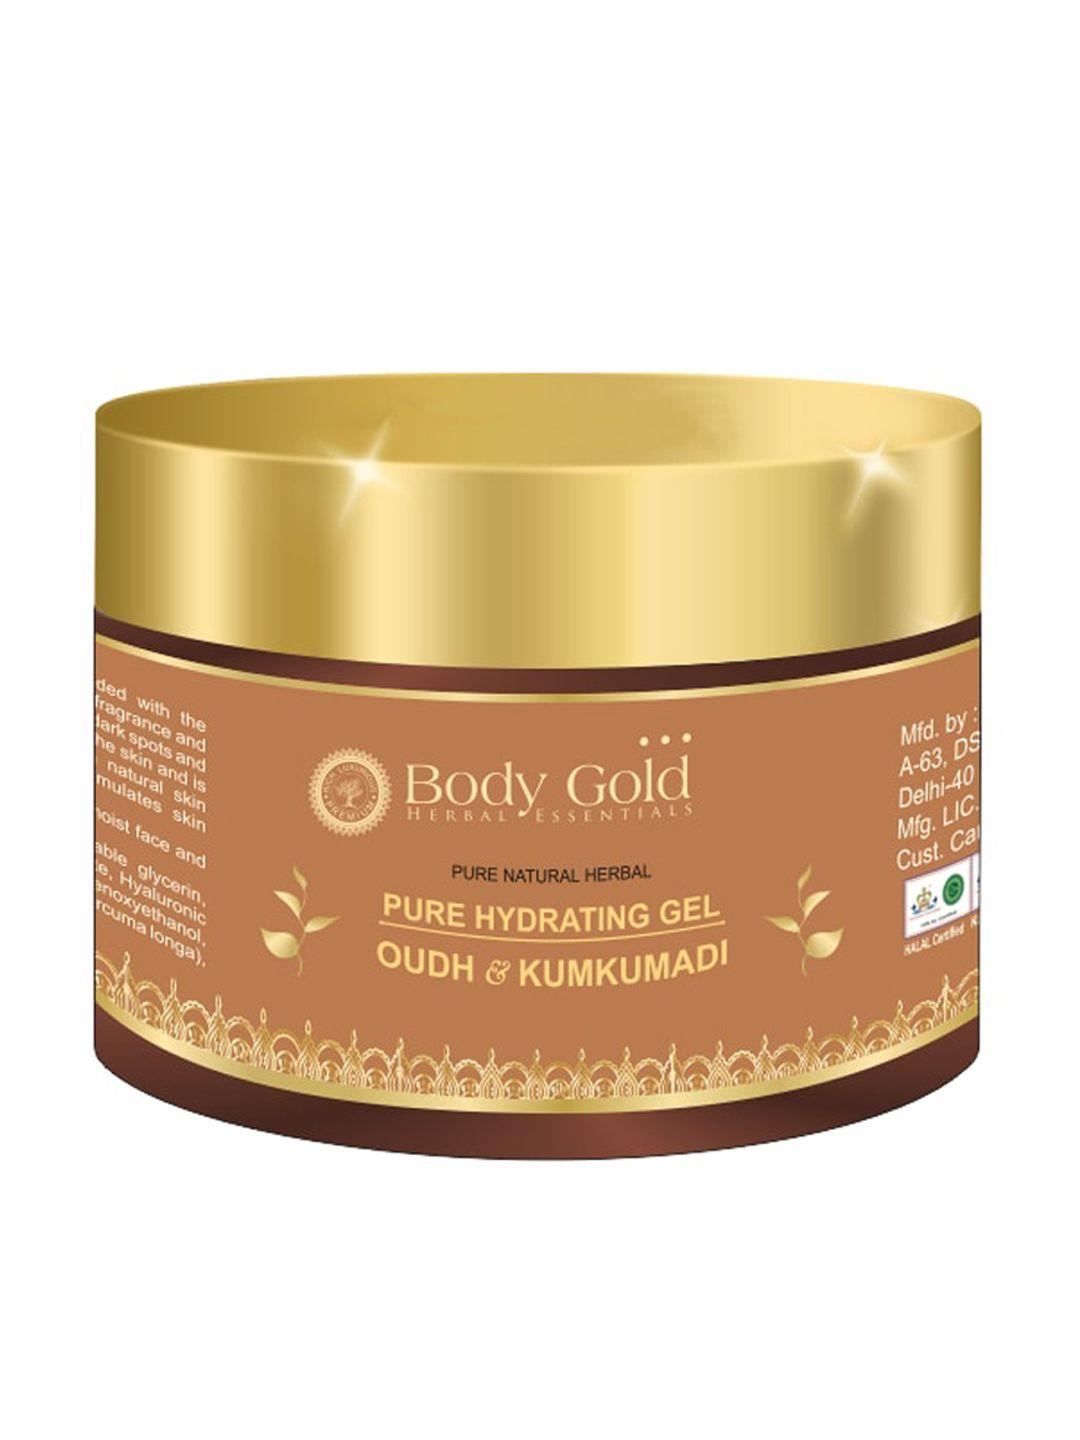 body gold pure hydrating gel with oudh & kumkumadi 45 g